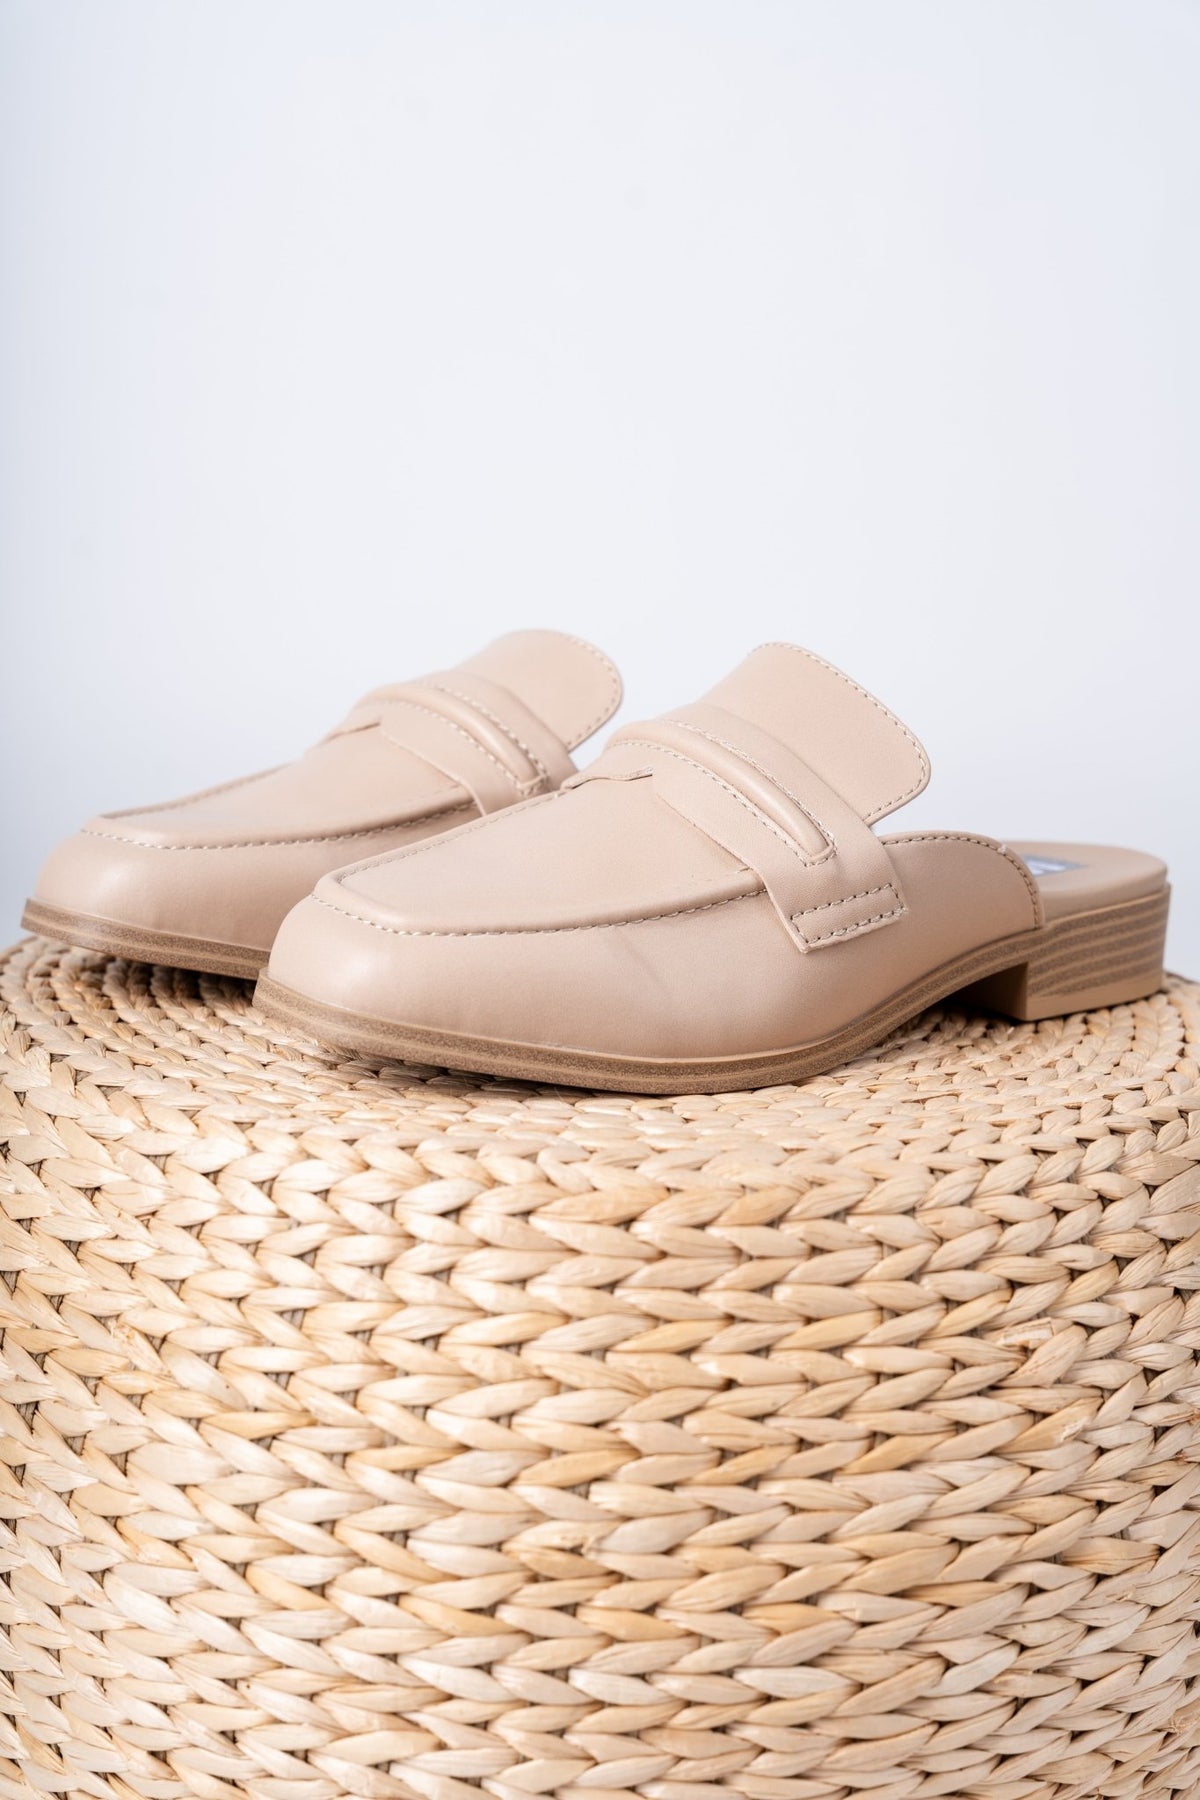 Milia mule loafer beige - Cute Shoes - Trendy Shoes at Lush Fashion Lounge Boutique in Oklahoma City